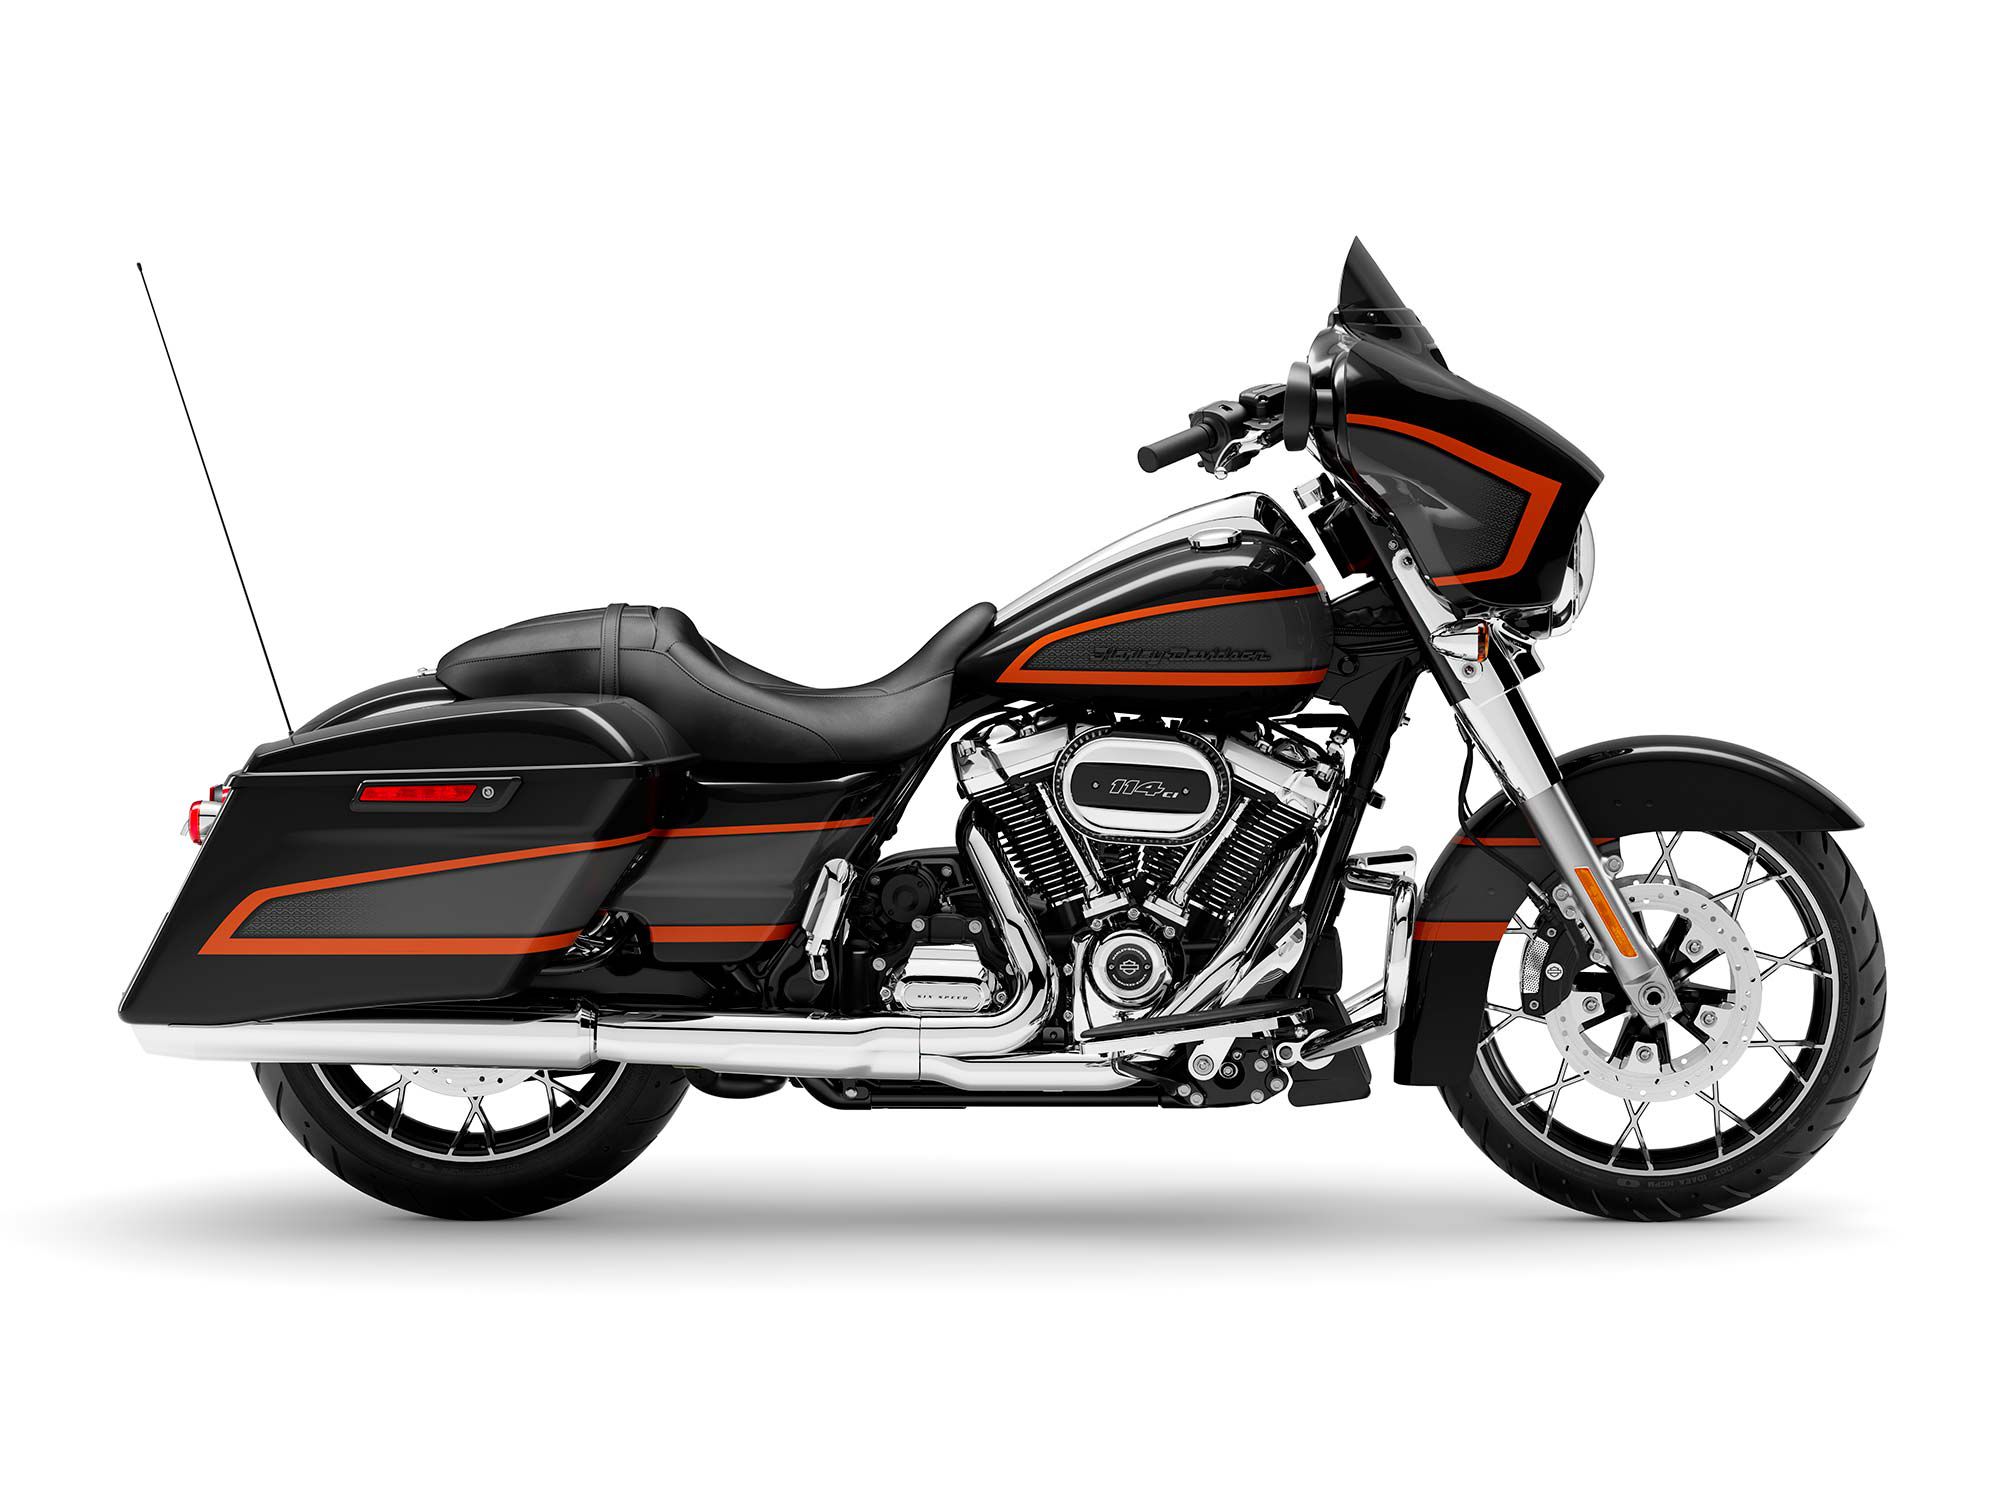 Harley will offer Apex paint on nine different touring models.